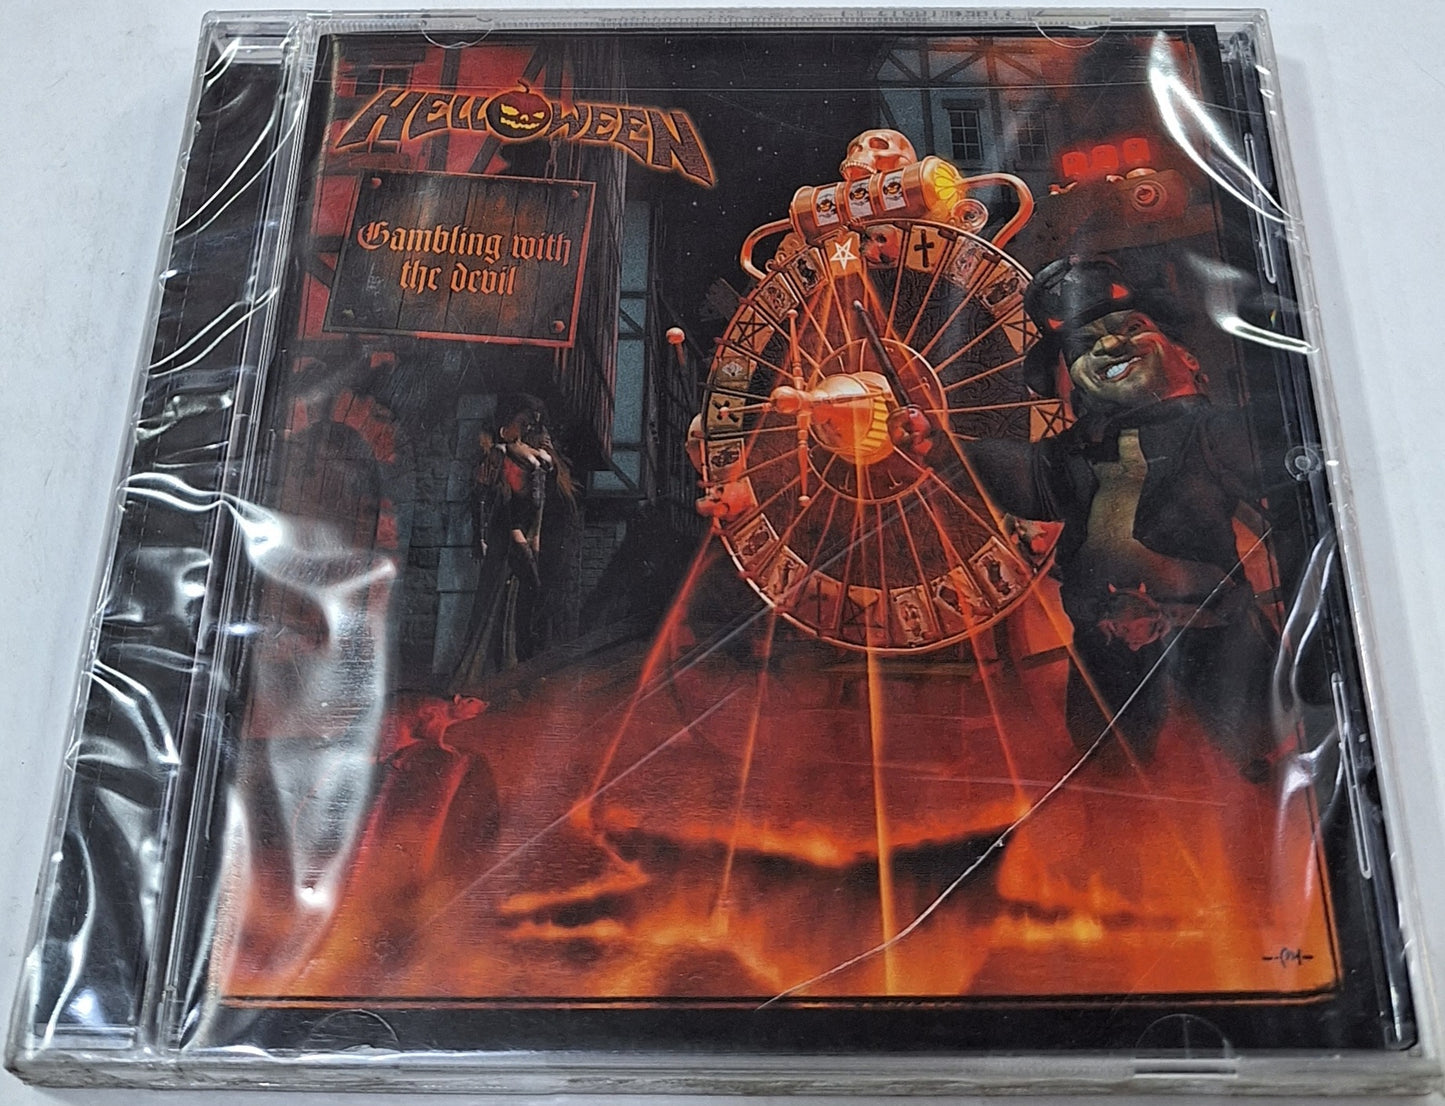 HELLOWEEN - GAMBLING WITH THE DEVIL  CD